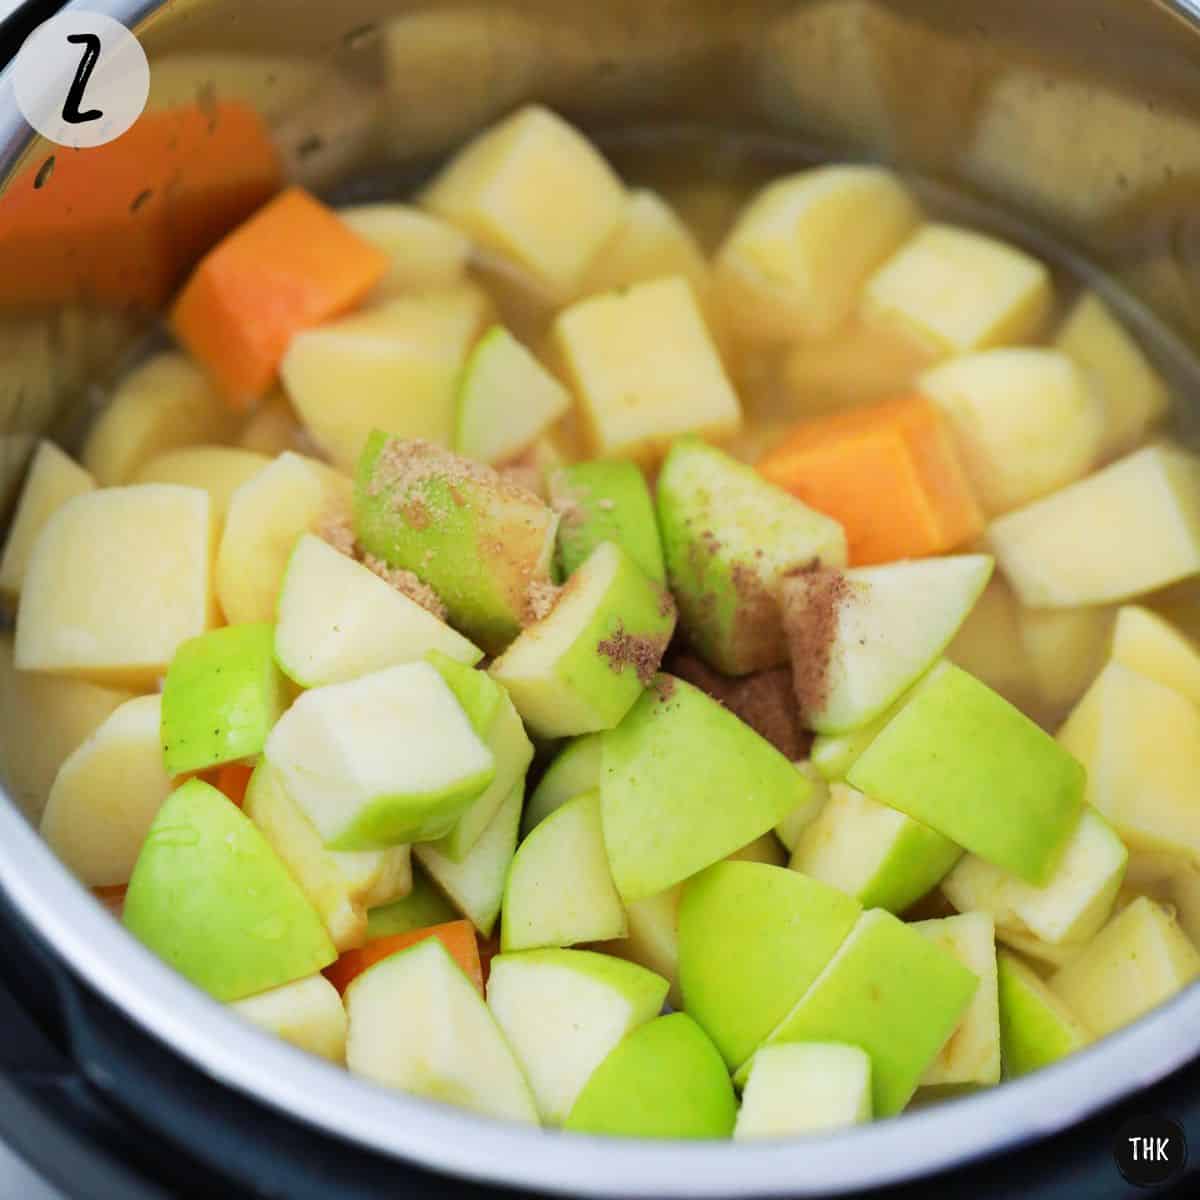 Pot of soup with chunks of apple, squash, potato, broth and spices.